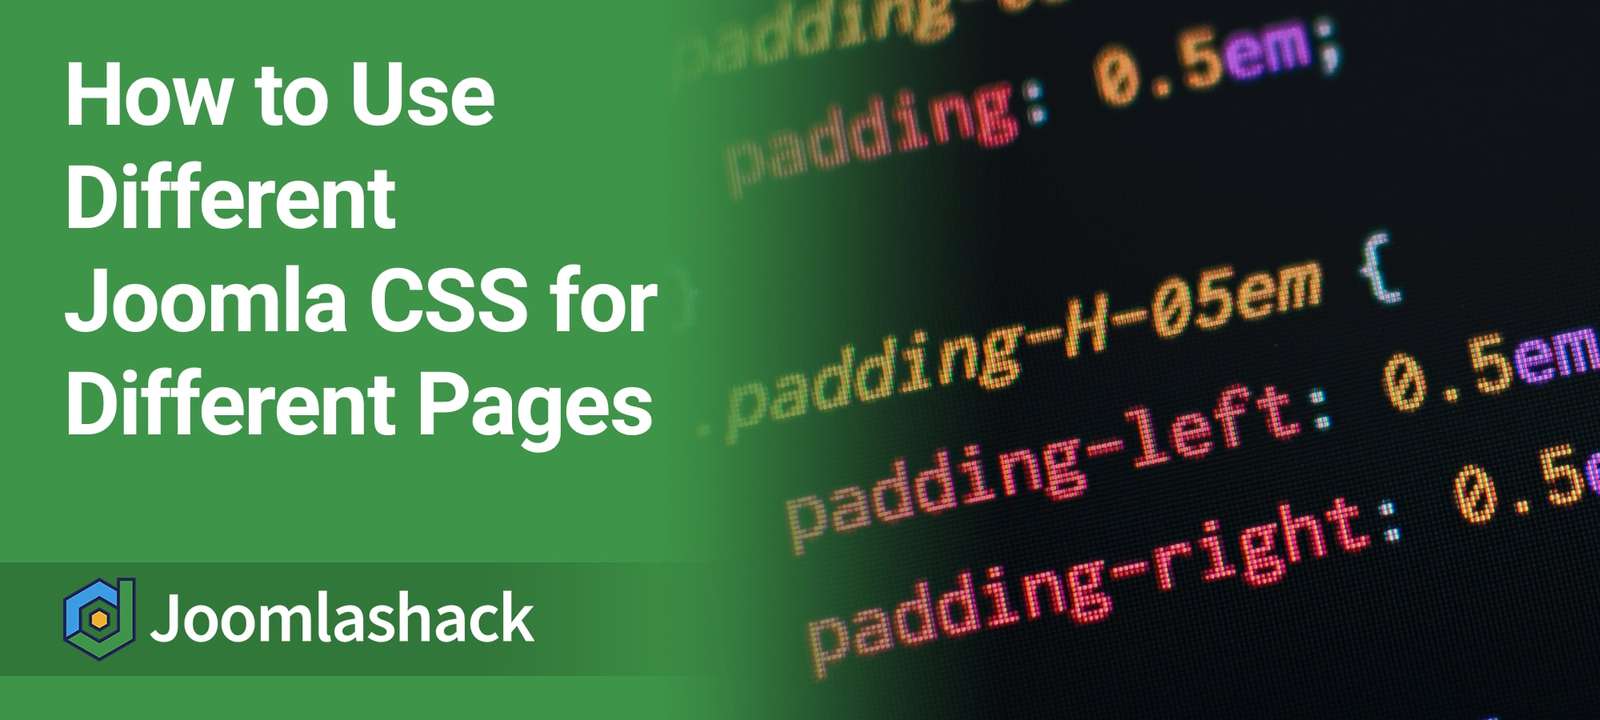 How to Use Different Joomla CSS for Different Pages